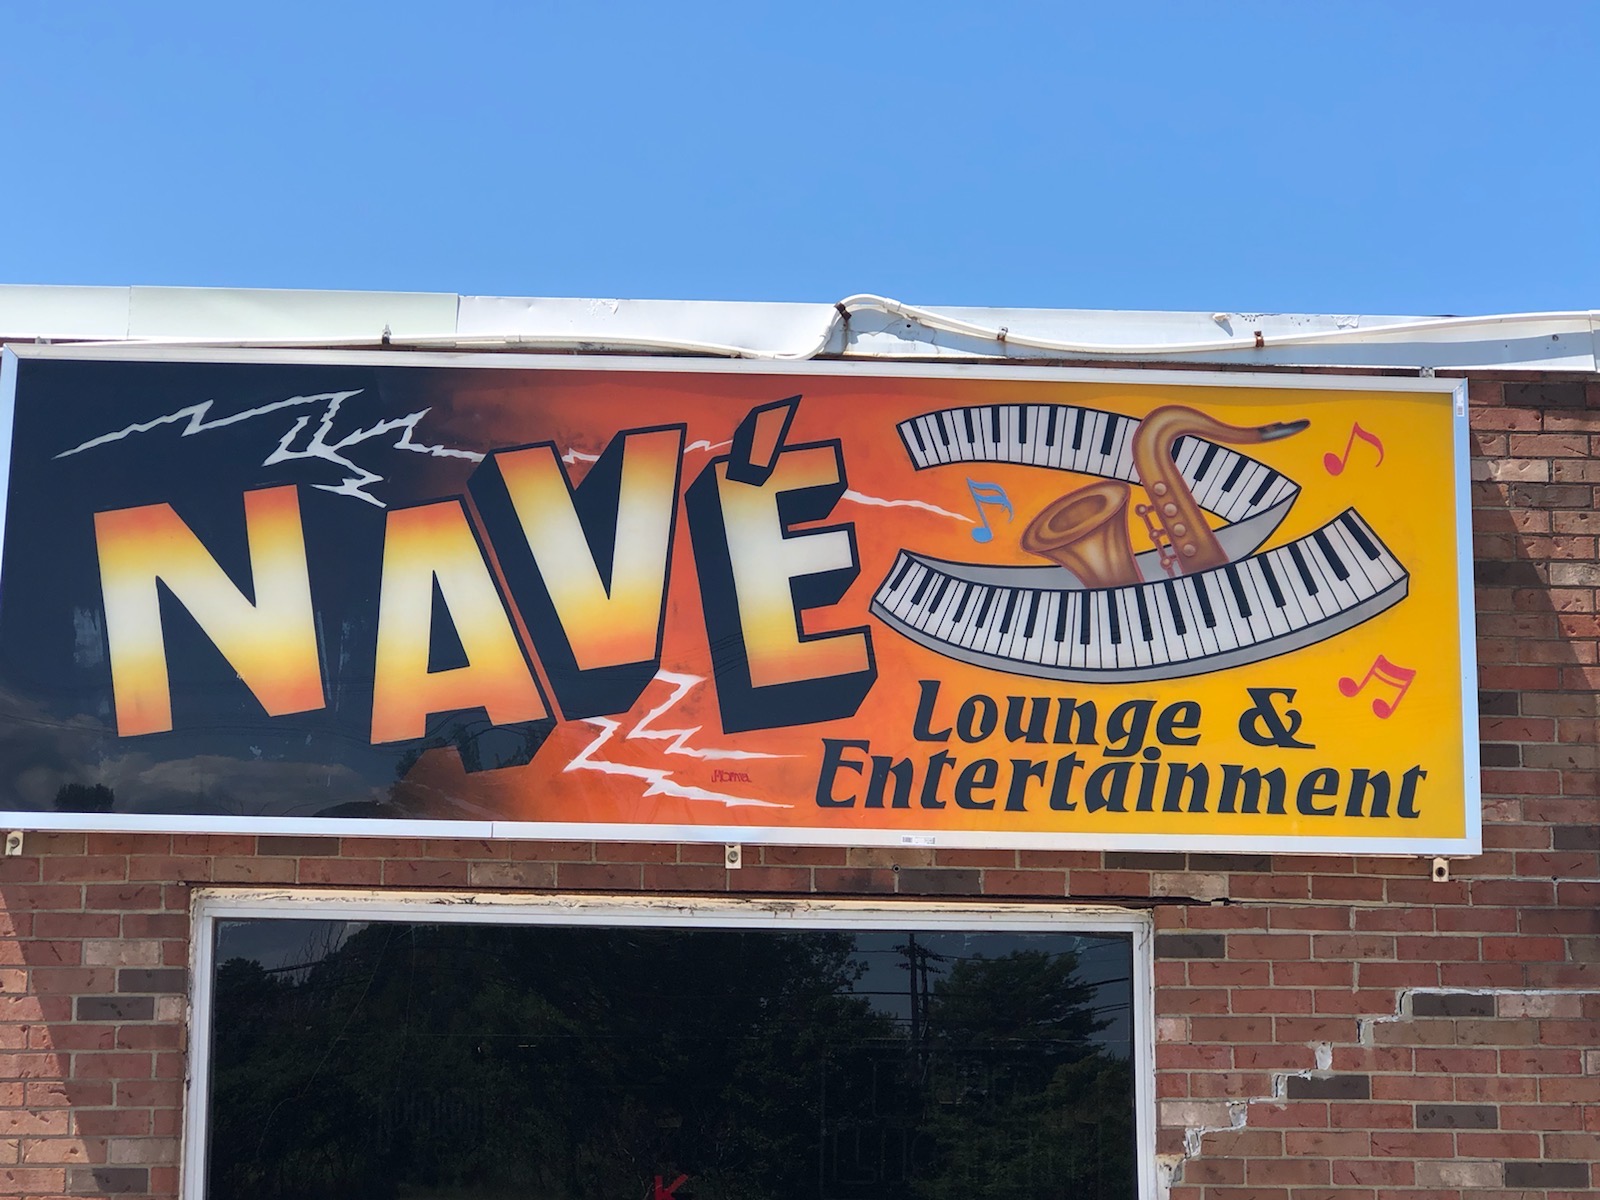 Nave' Lounge & Entertainment